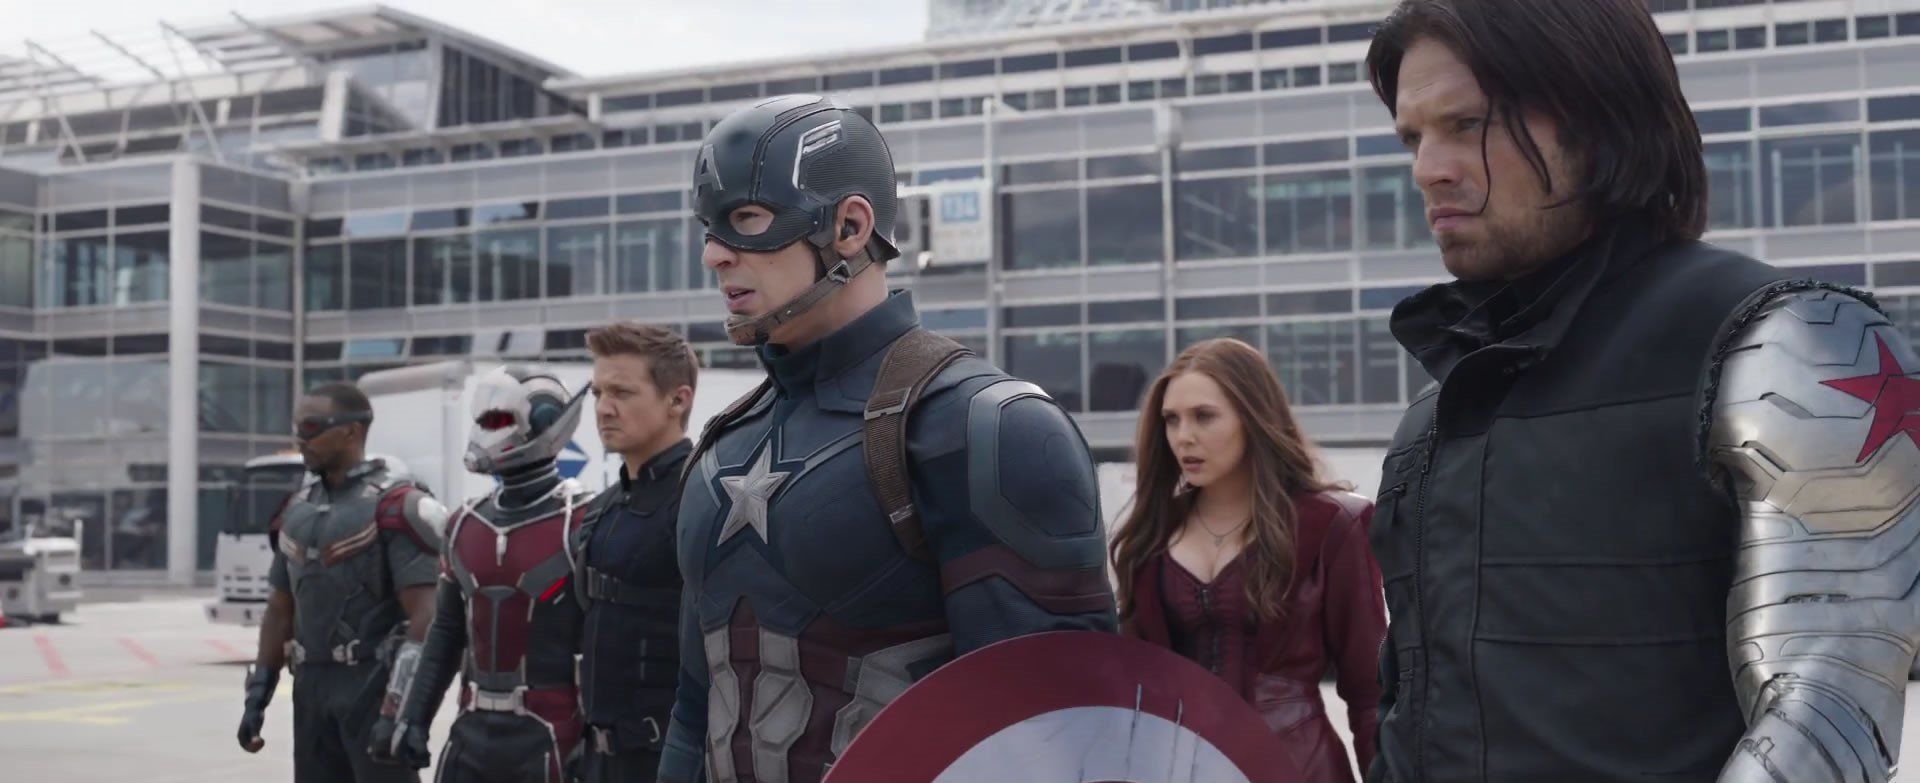 captain america, hawkeye, antman, winter soldier, falcon, and scarlet witch ready to fight on an airport runway